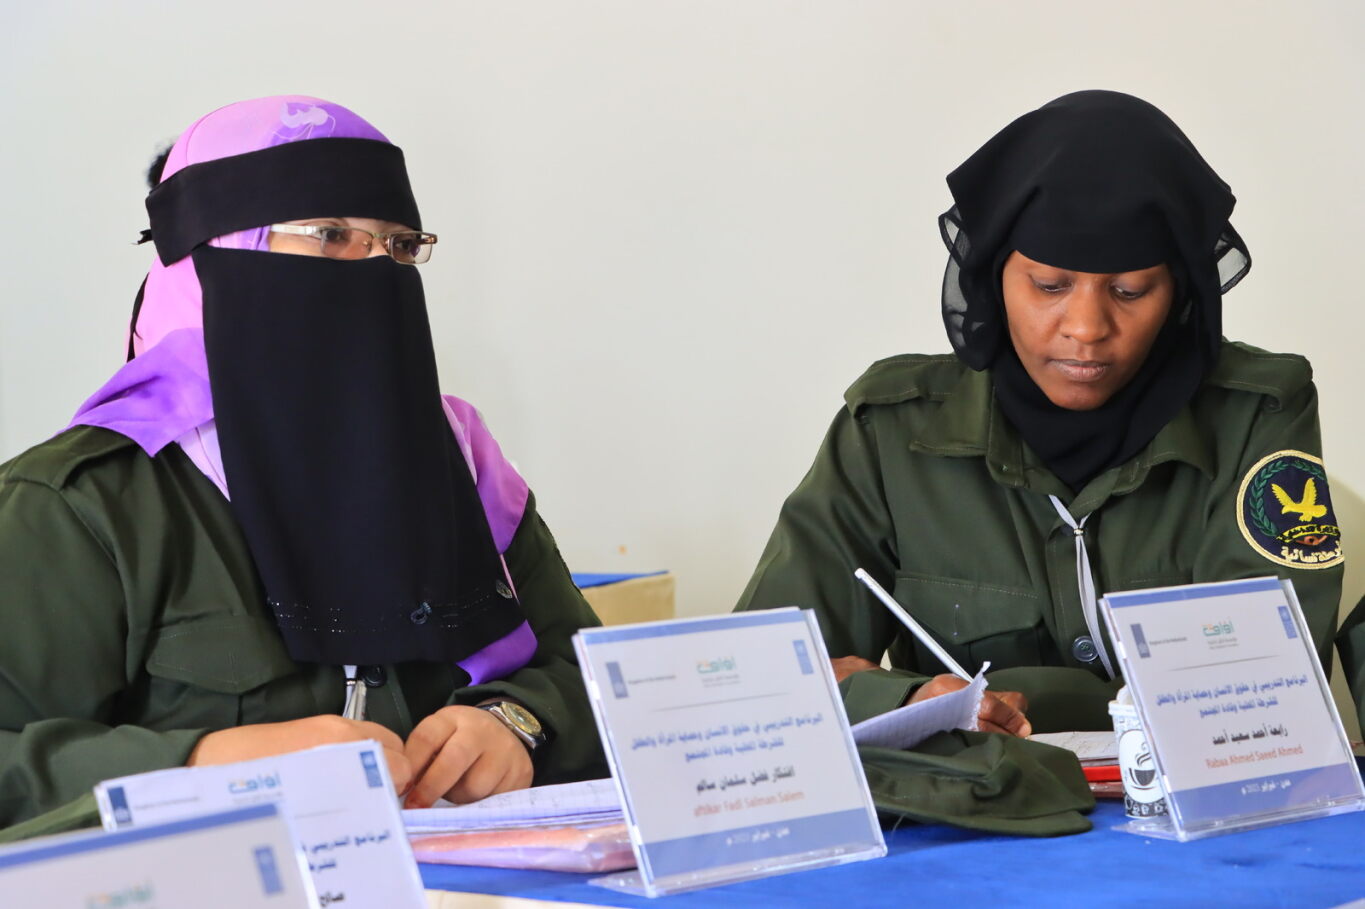 Woman in abeya sits next to woman in police uniform